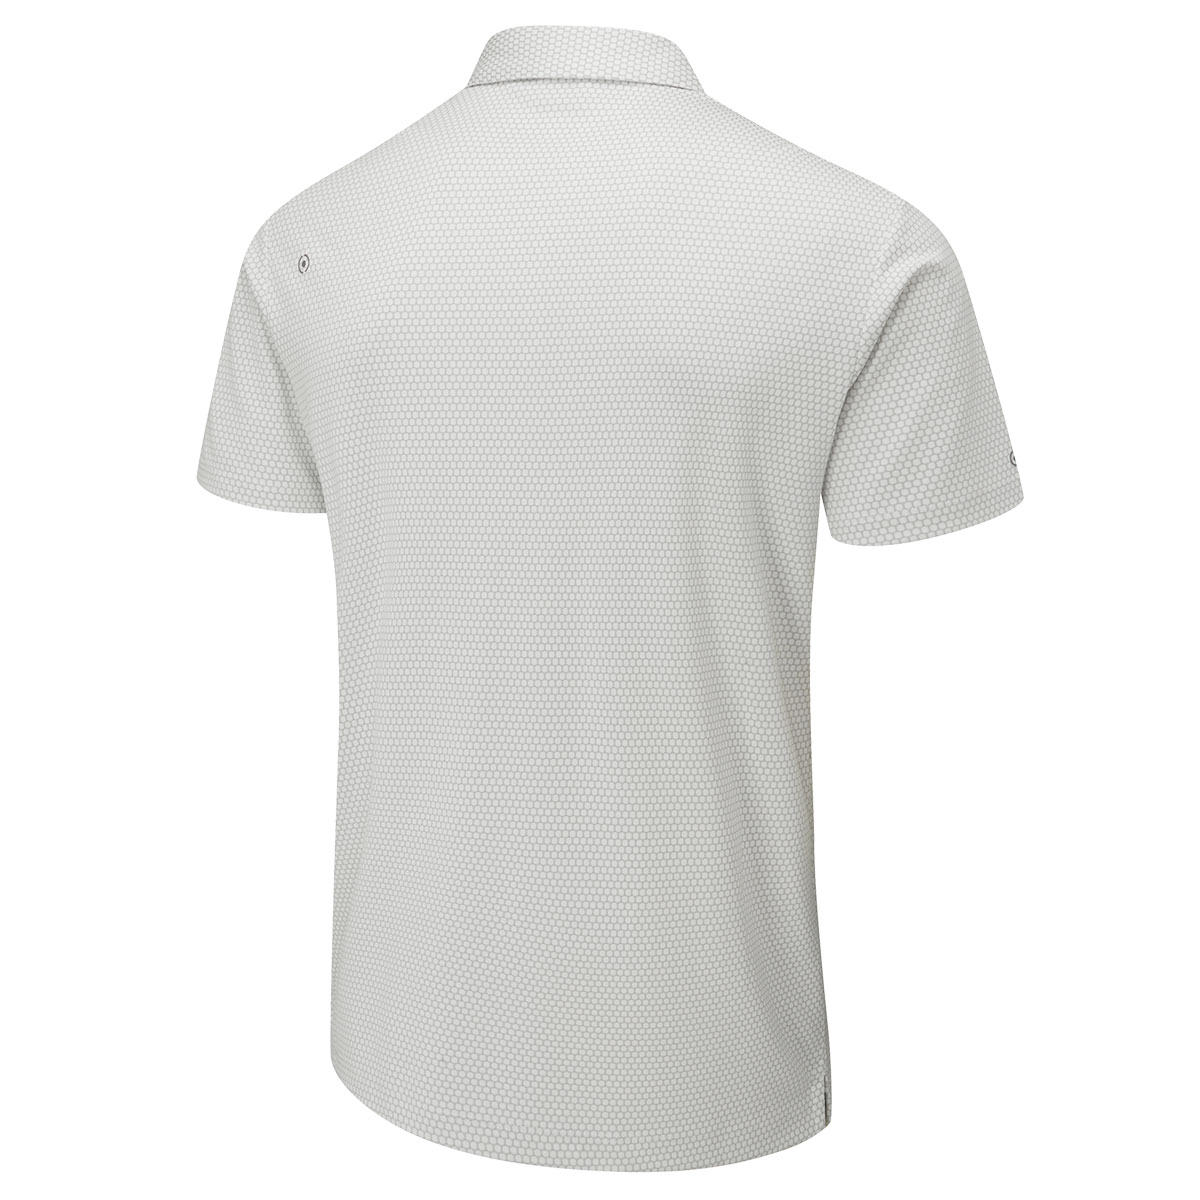 PING Men's Halcyon Golf Polo Shirt from american golf